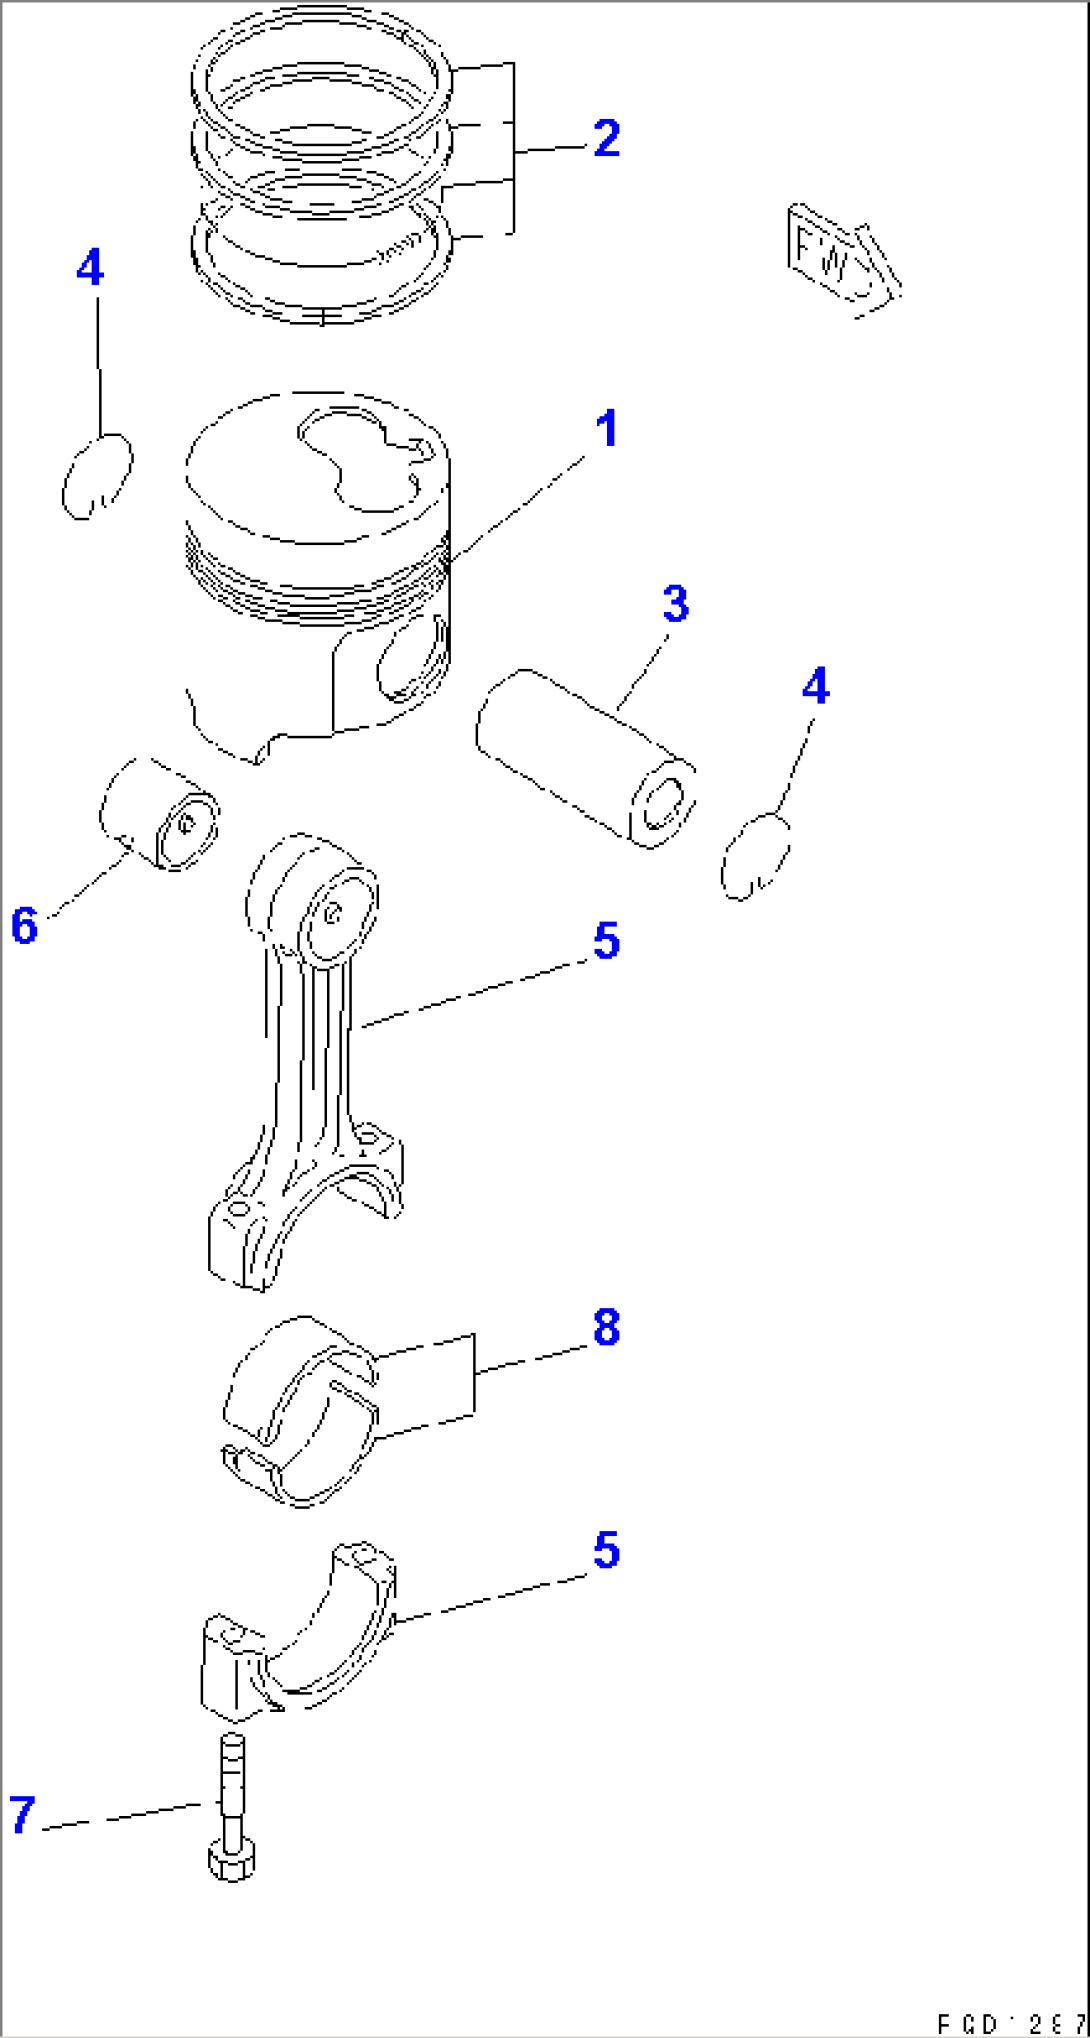 PISTON AND CONNECTING ROD